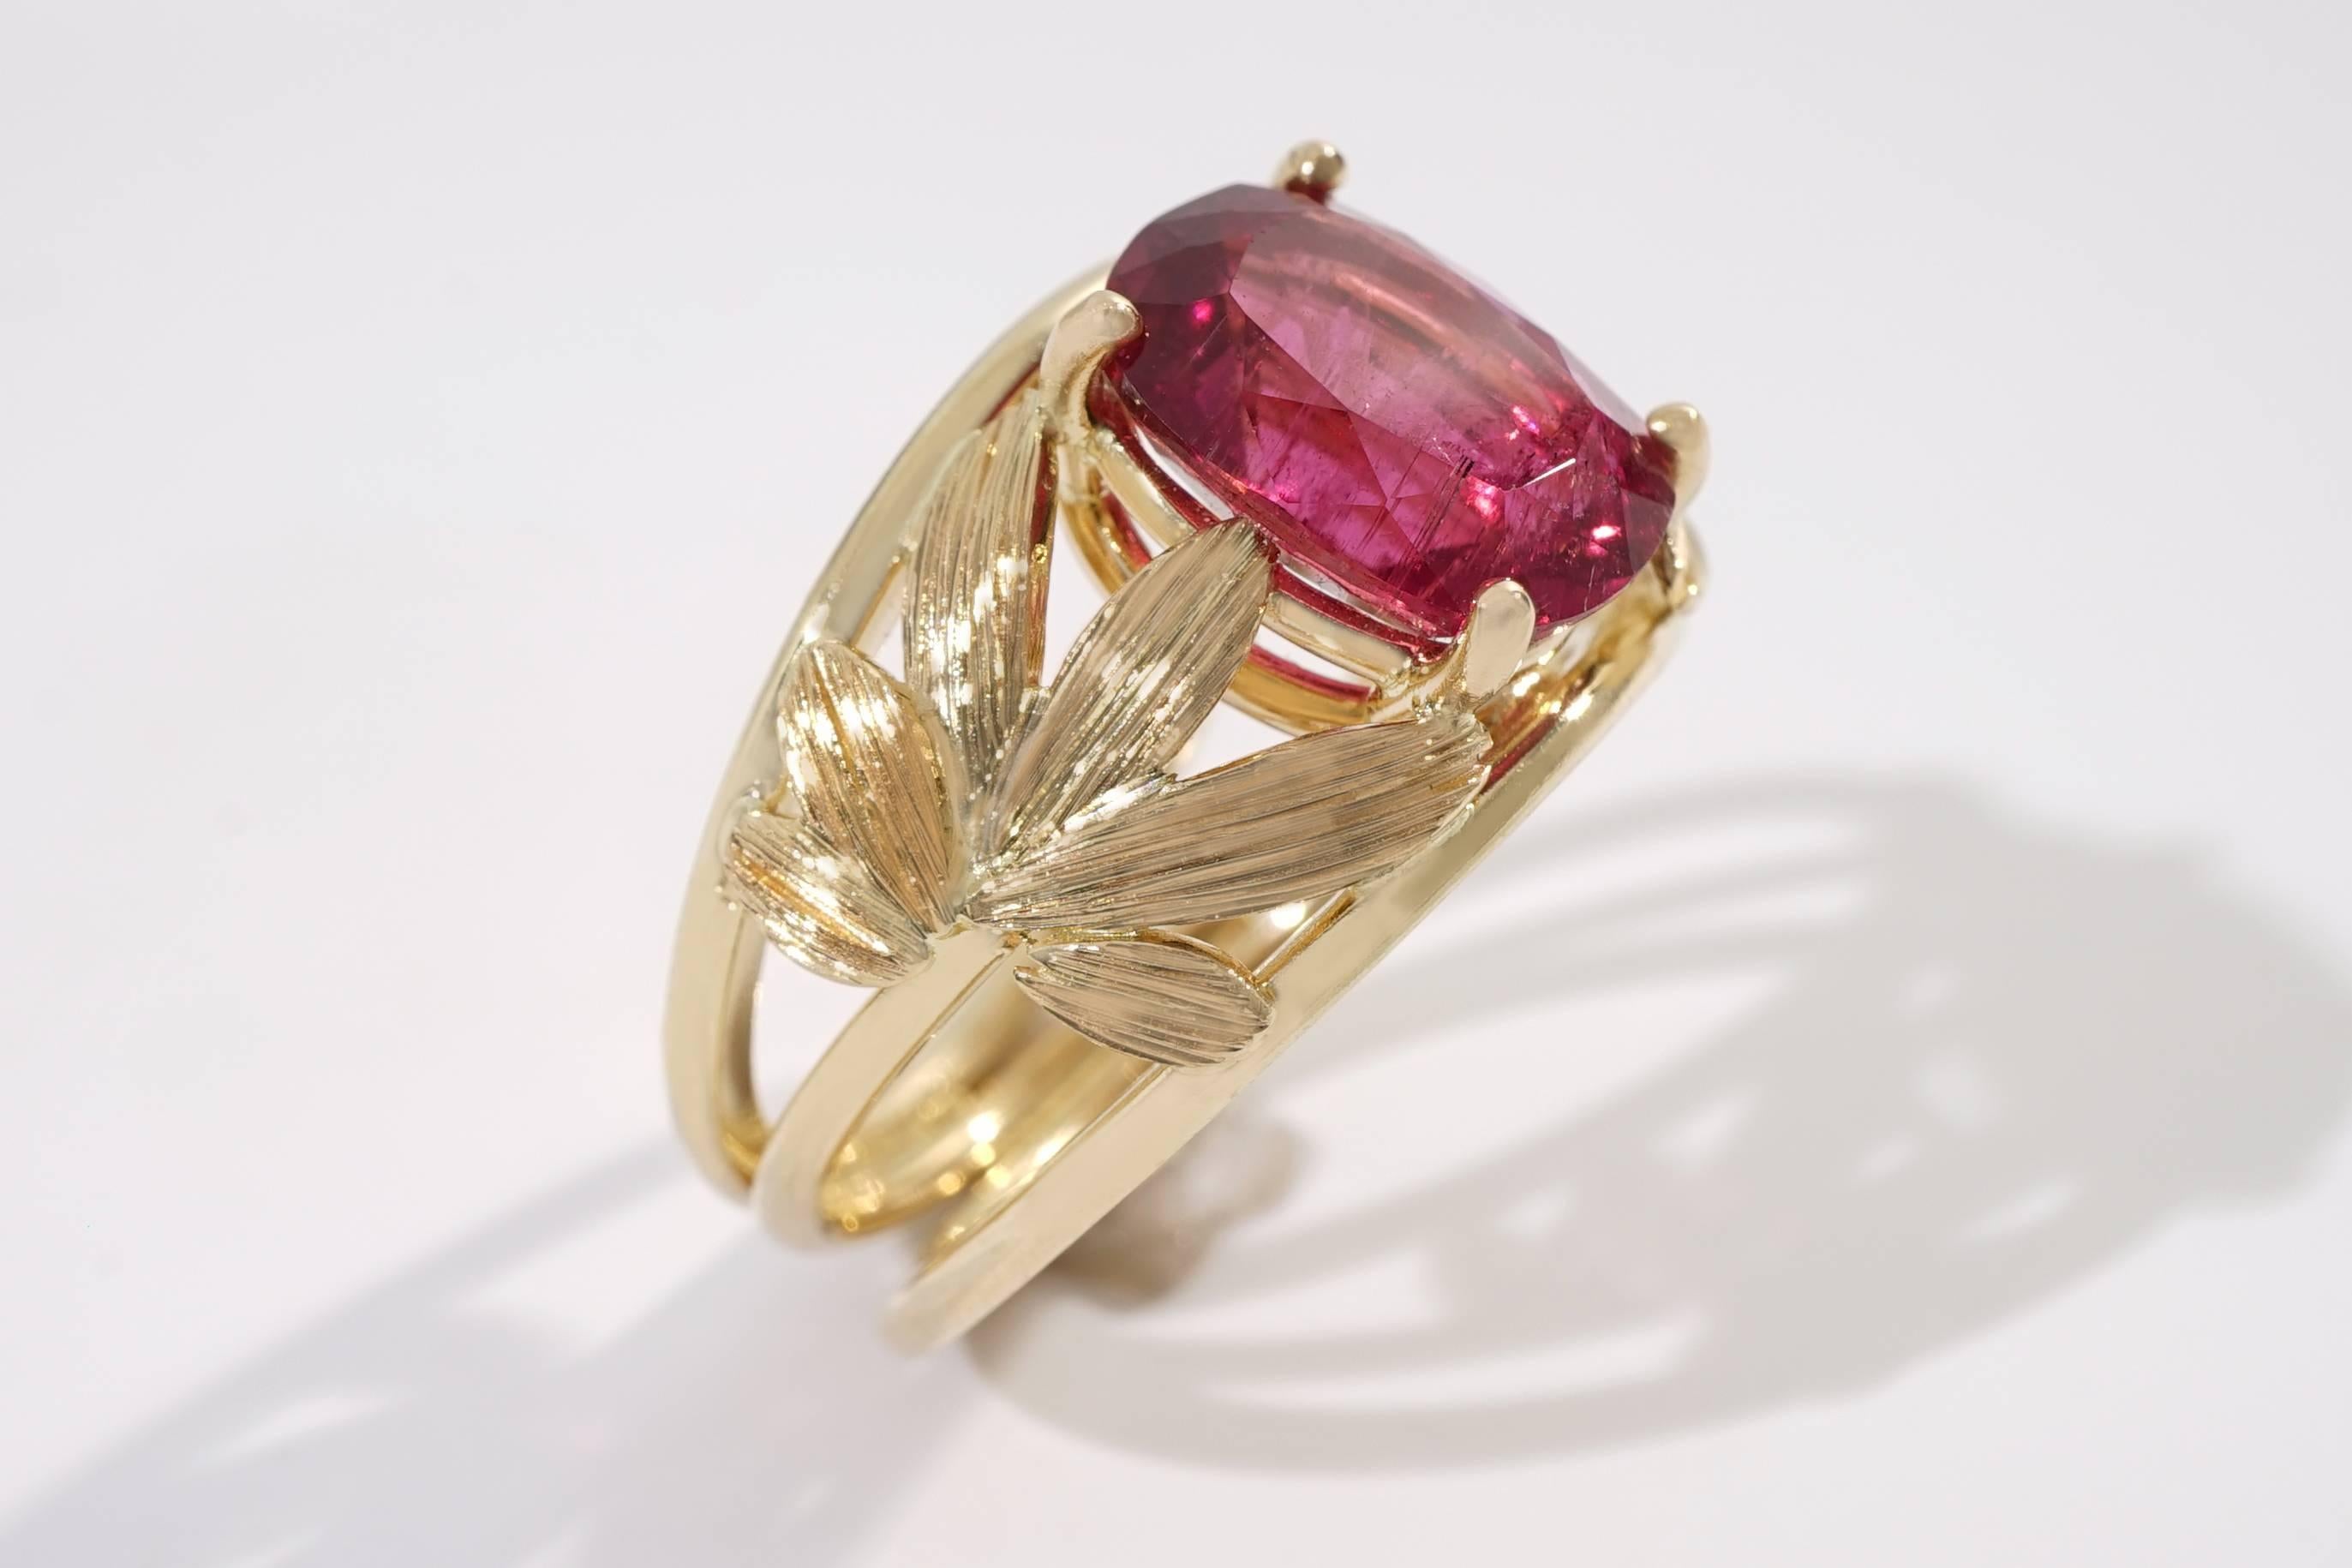 Oval Cut Coralie Van Caloen Yellow Gold 18 Carat Palm Leaves And Pink Rubellite Band Ring